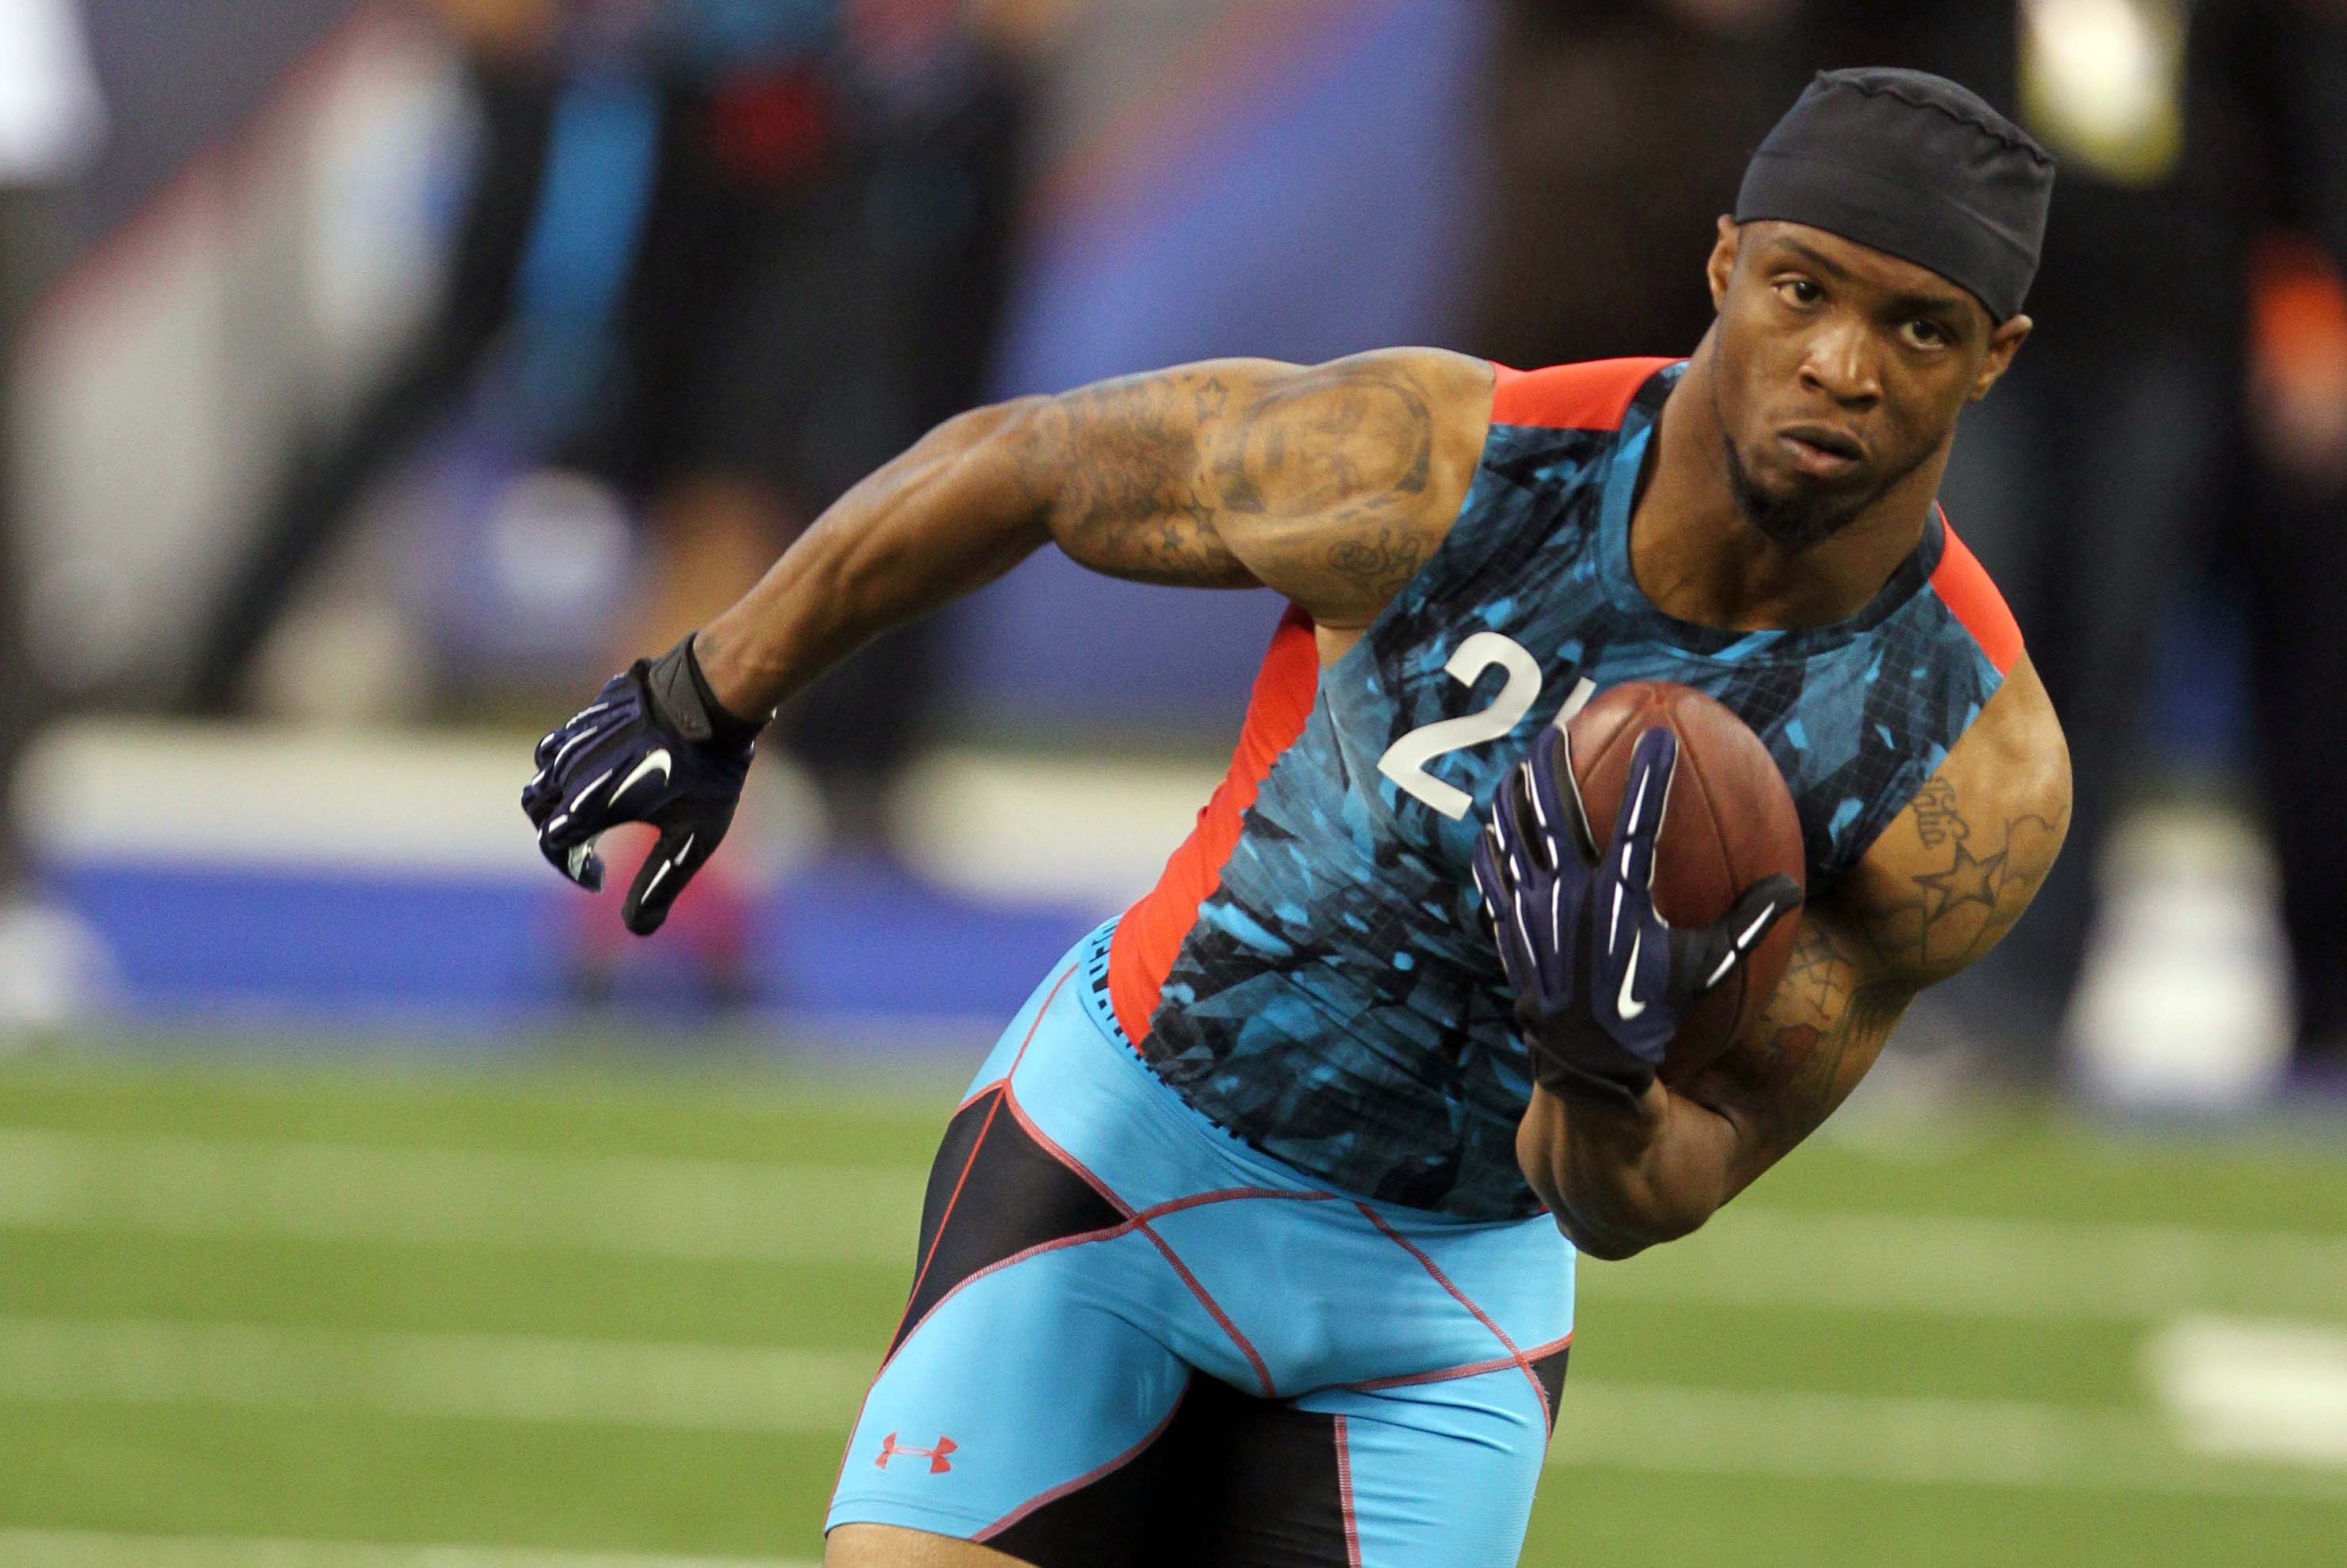 Tavon Austin Projecting Perfect Fit for One of Combine's Fastest